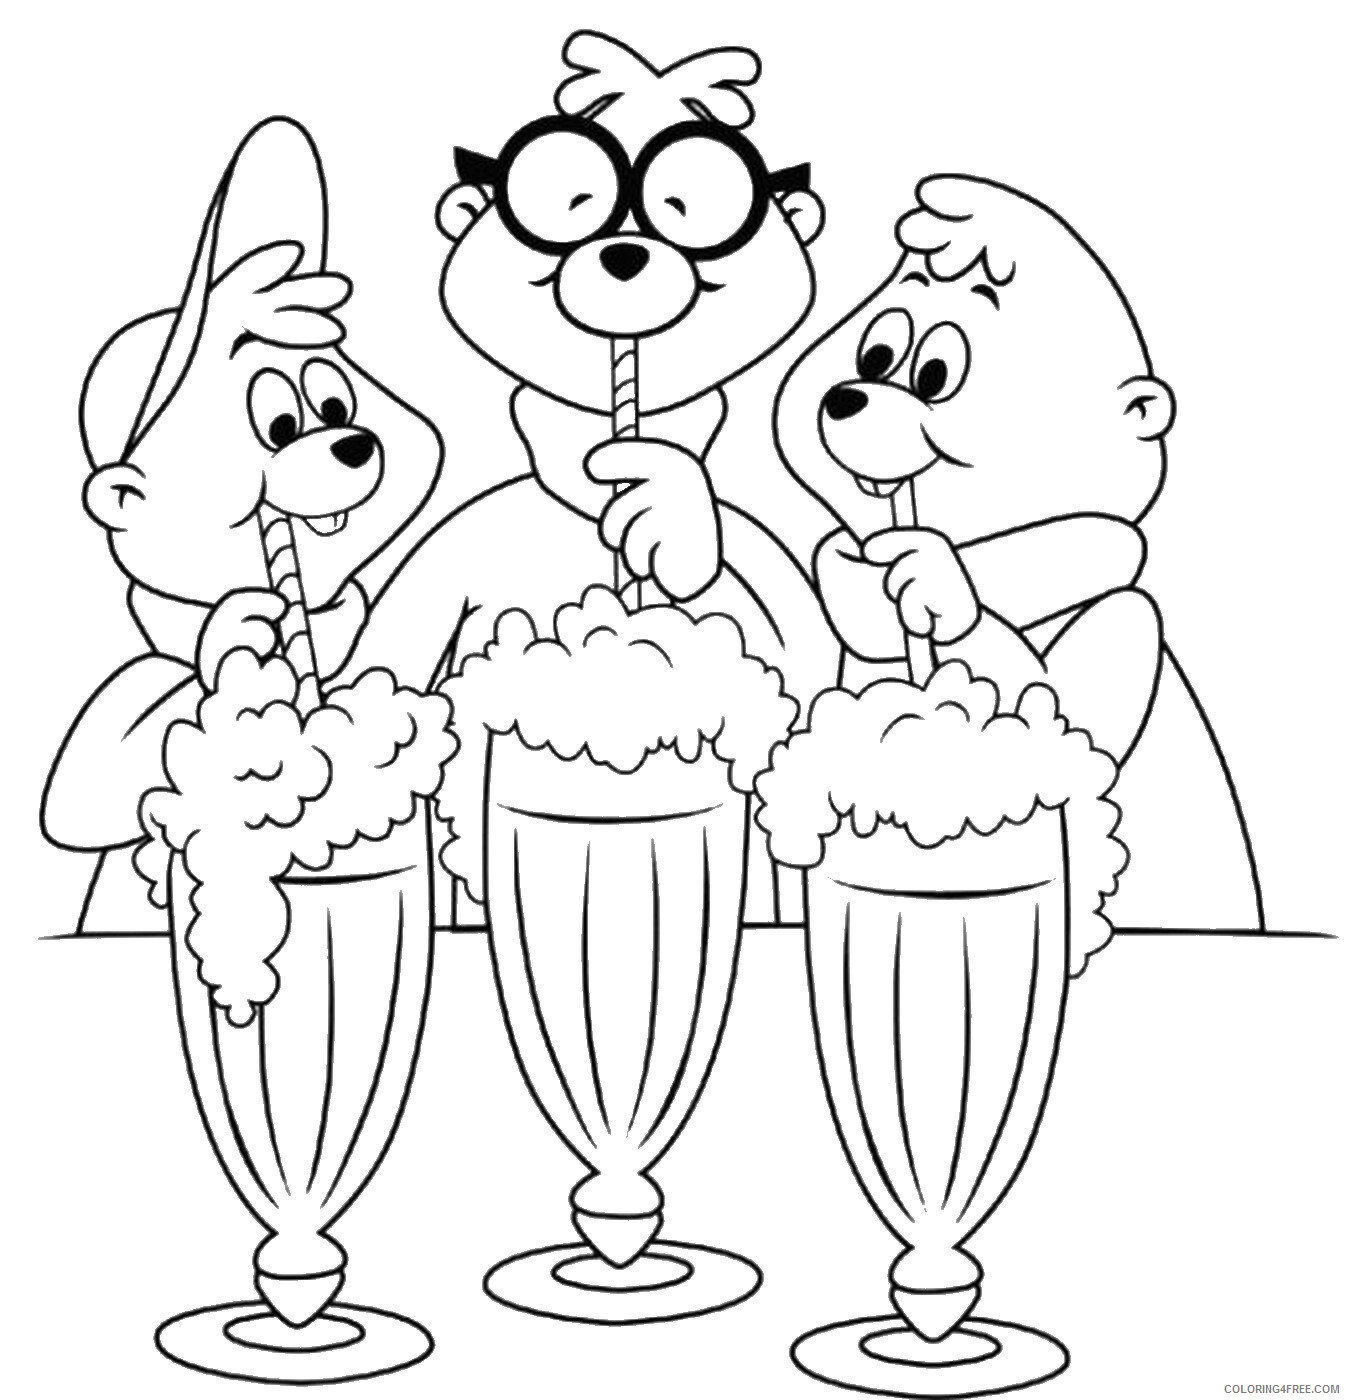 Alvin and the Chipmunks Coloring Pages TV Film alvin_cl_2 Printable 2020 00058 Coloring4free